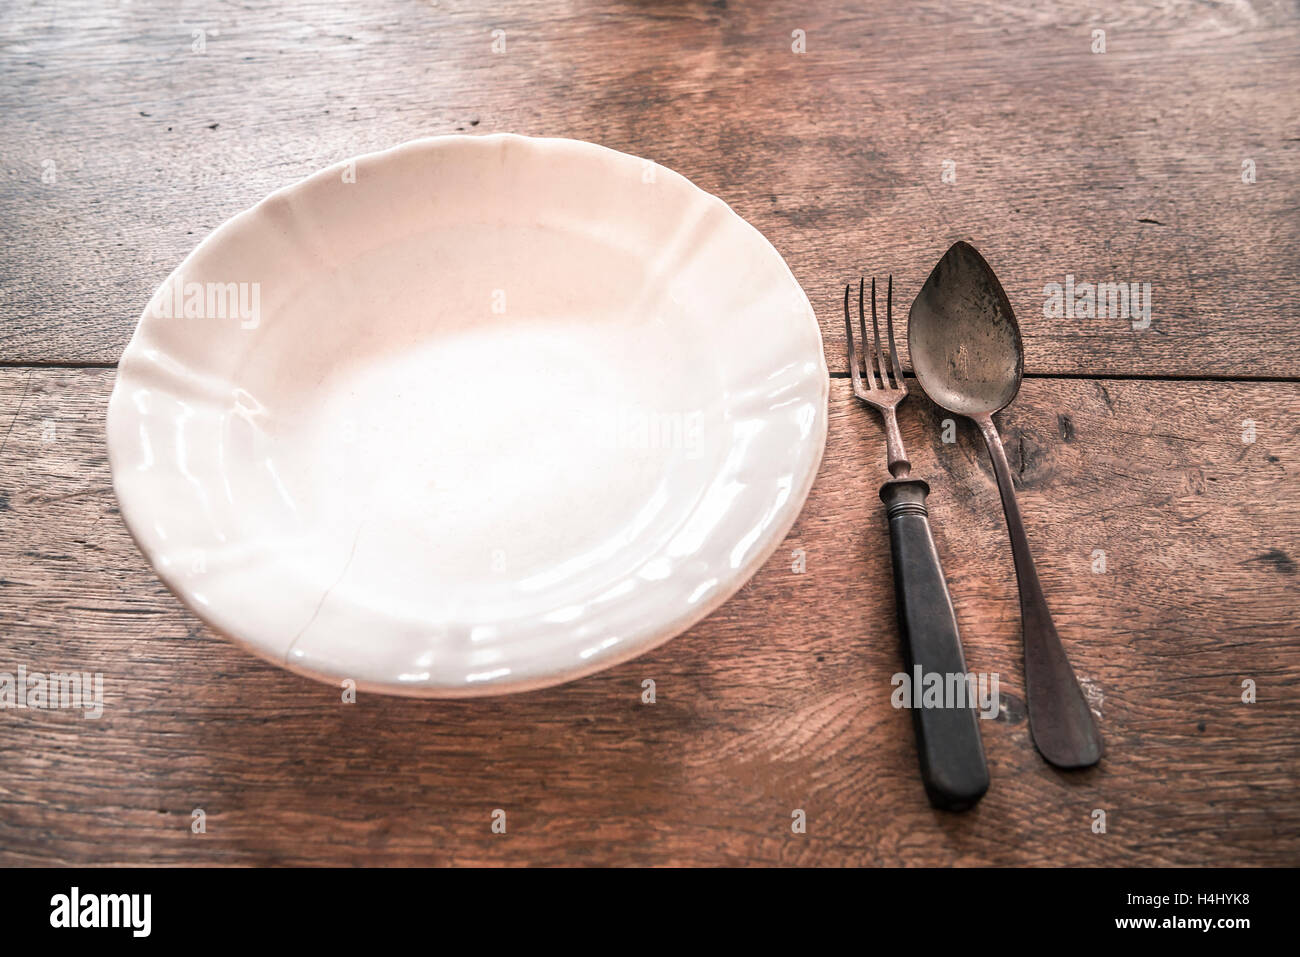 Rustic weathered tableware on wooden table Stock Photo